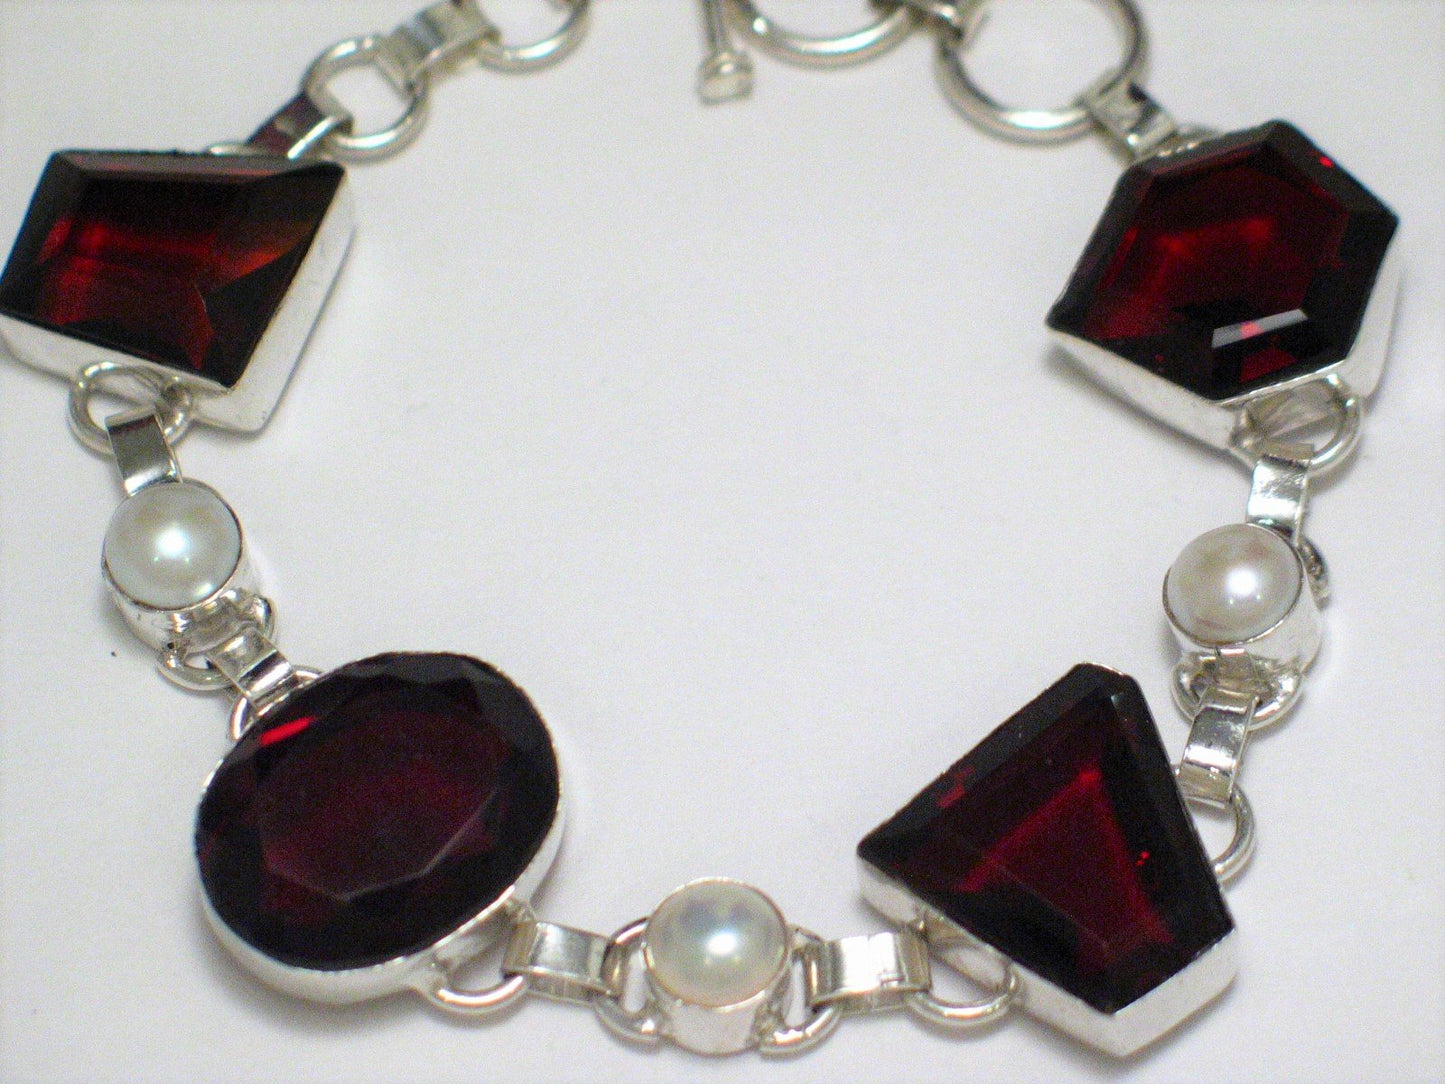 Sterling Silver Bracelet , Toggle Style 8" Big Chunky Red Stone Pearl Tennis Bracelet - Pre-owned Jewelry online